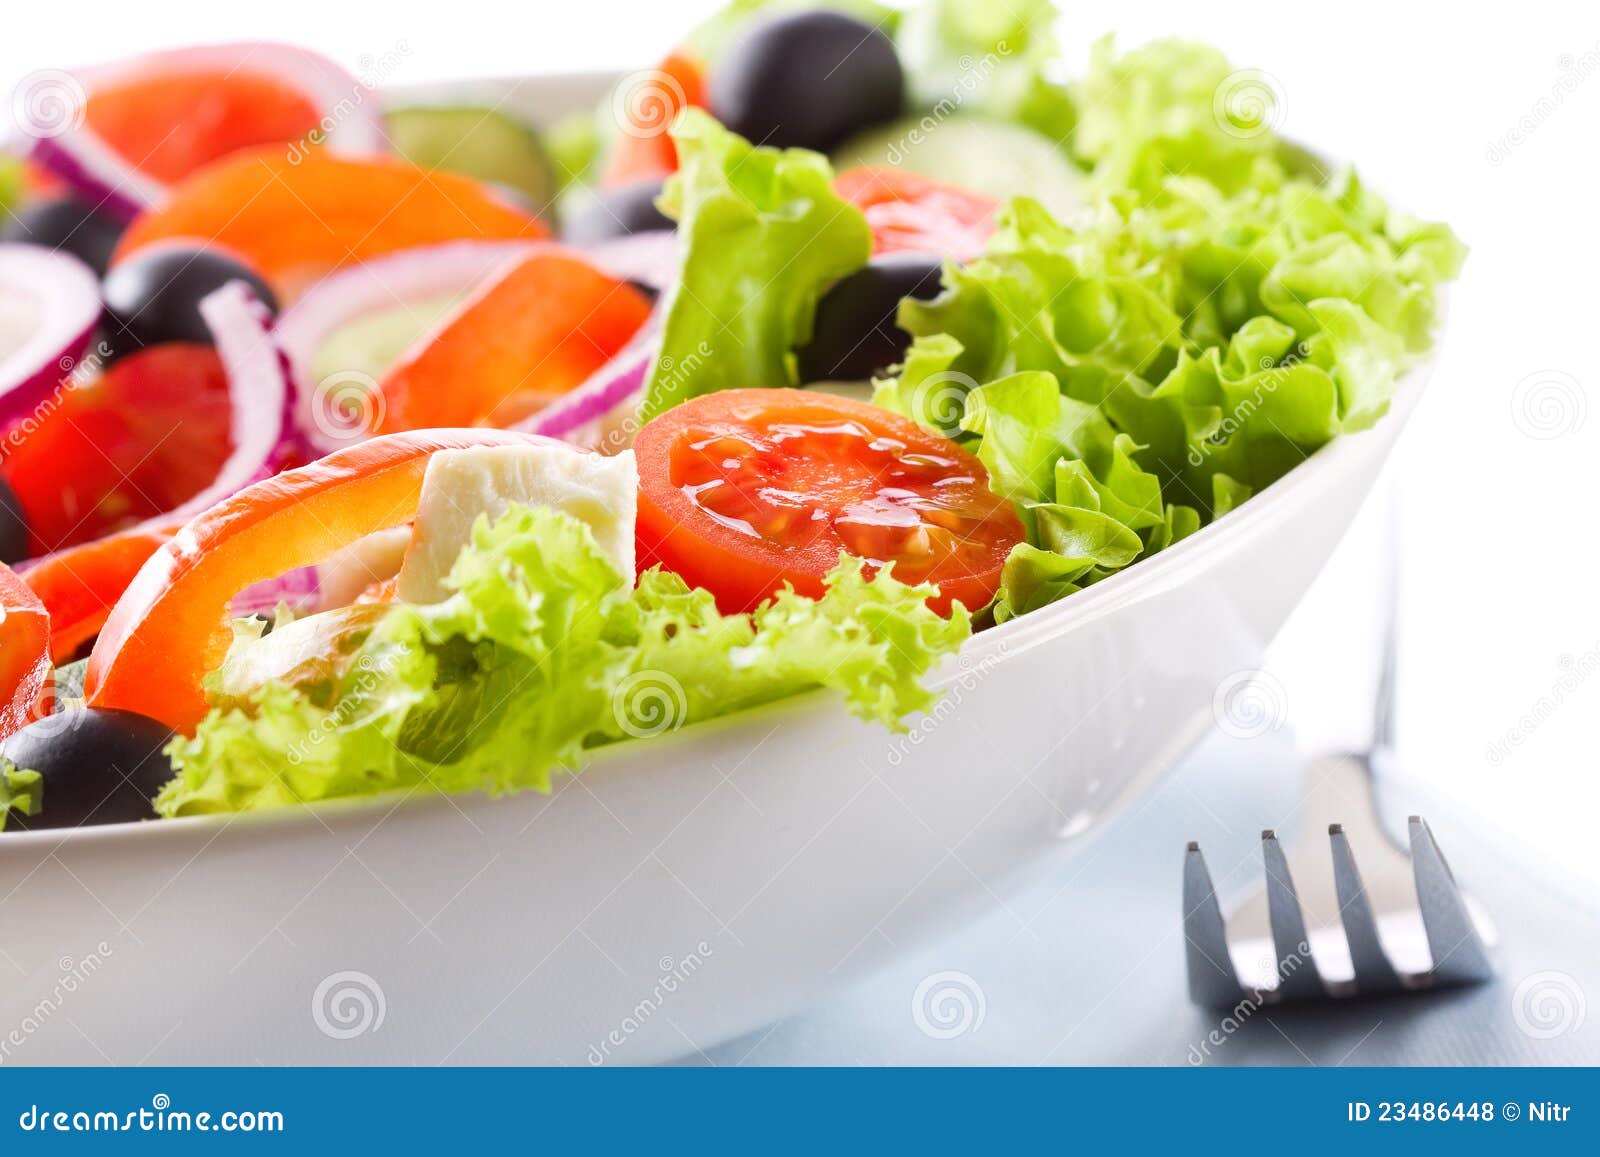 Salad with Vegetables and Greens Stock Photo - Image of snack, dinner ...